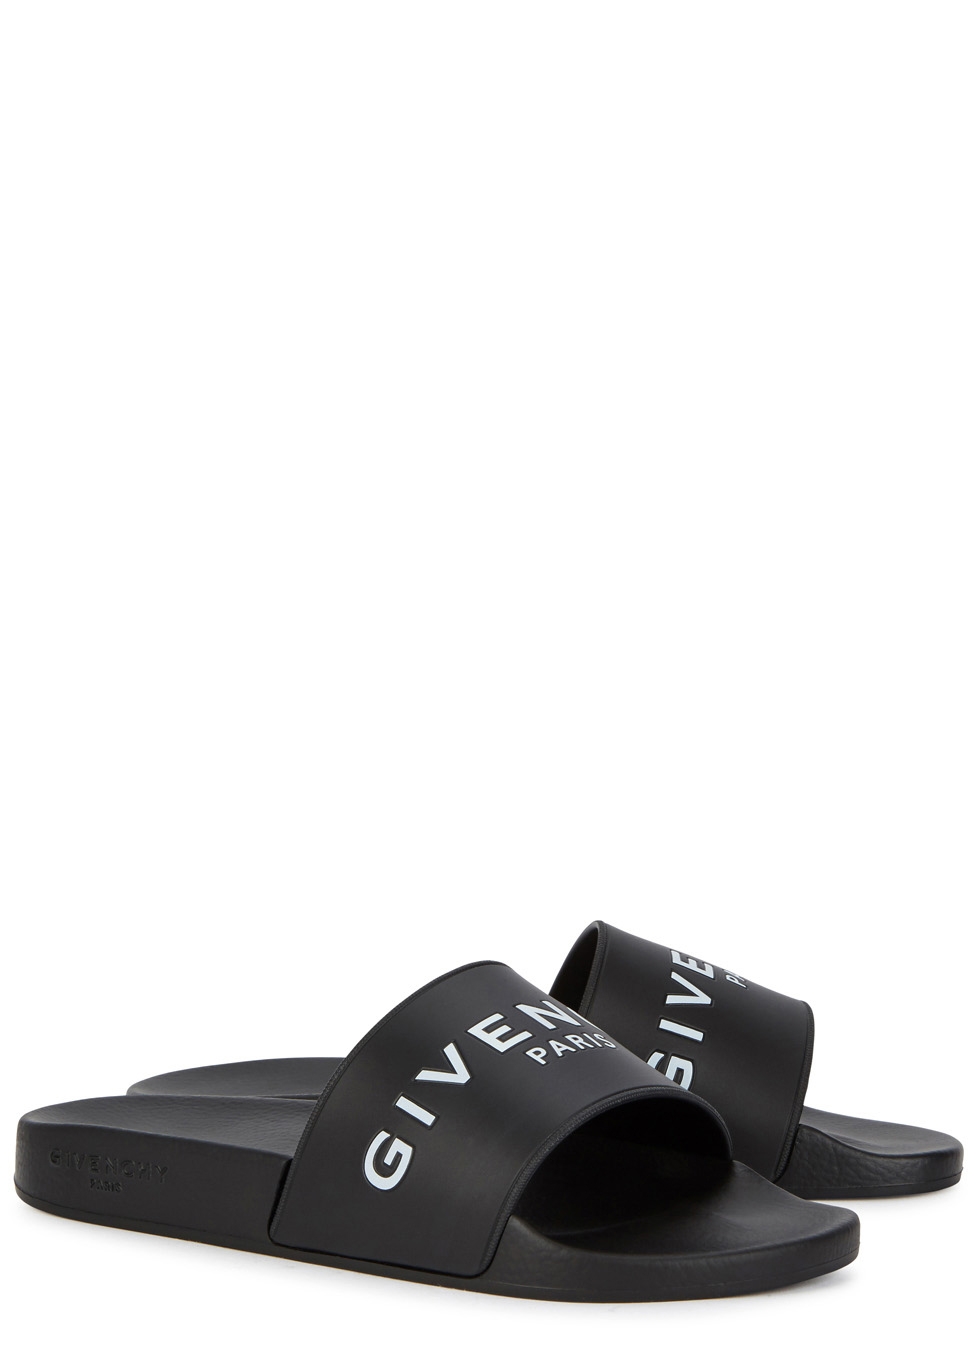 givenchy sliders size 4